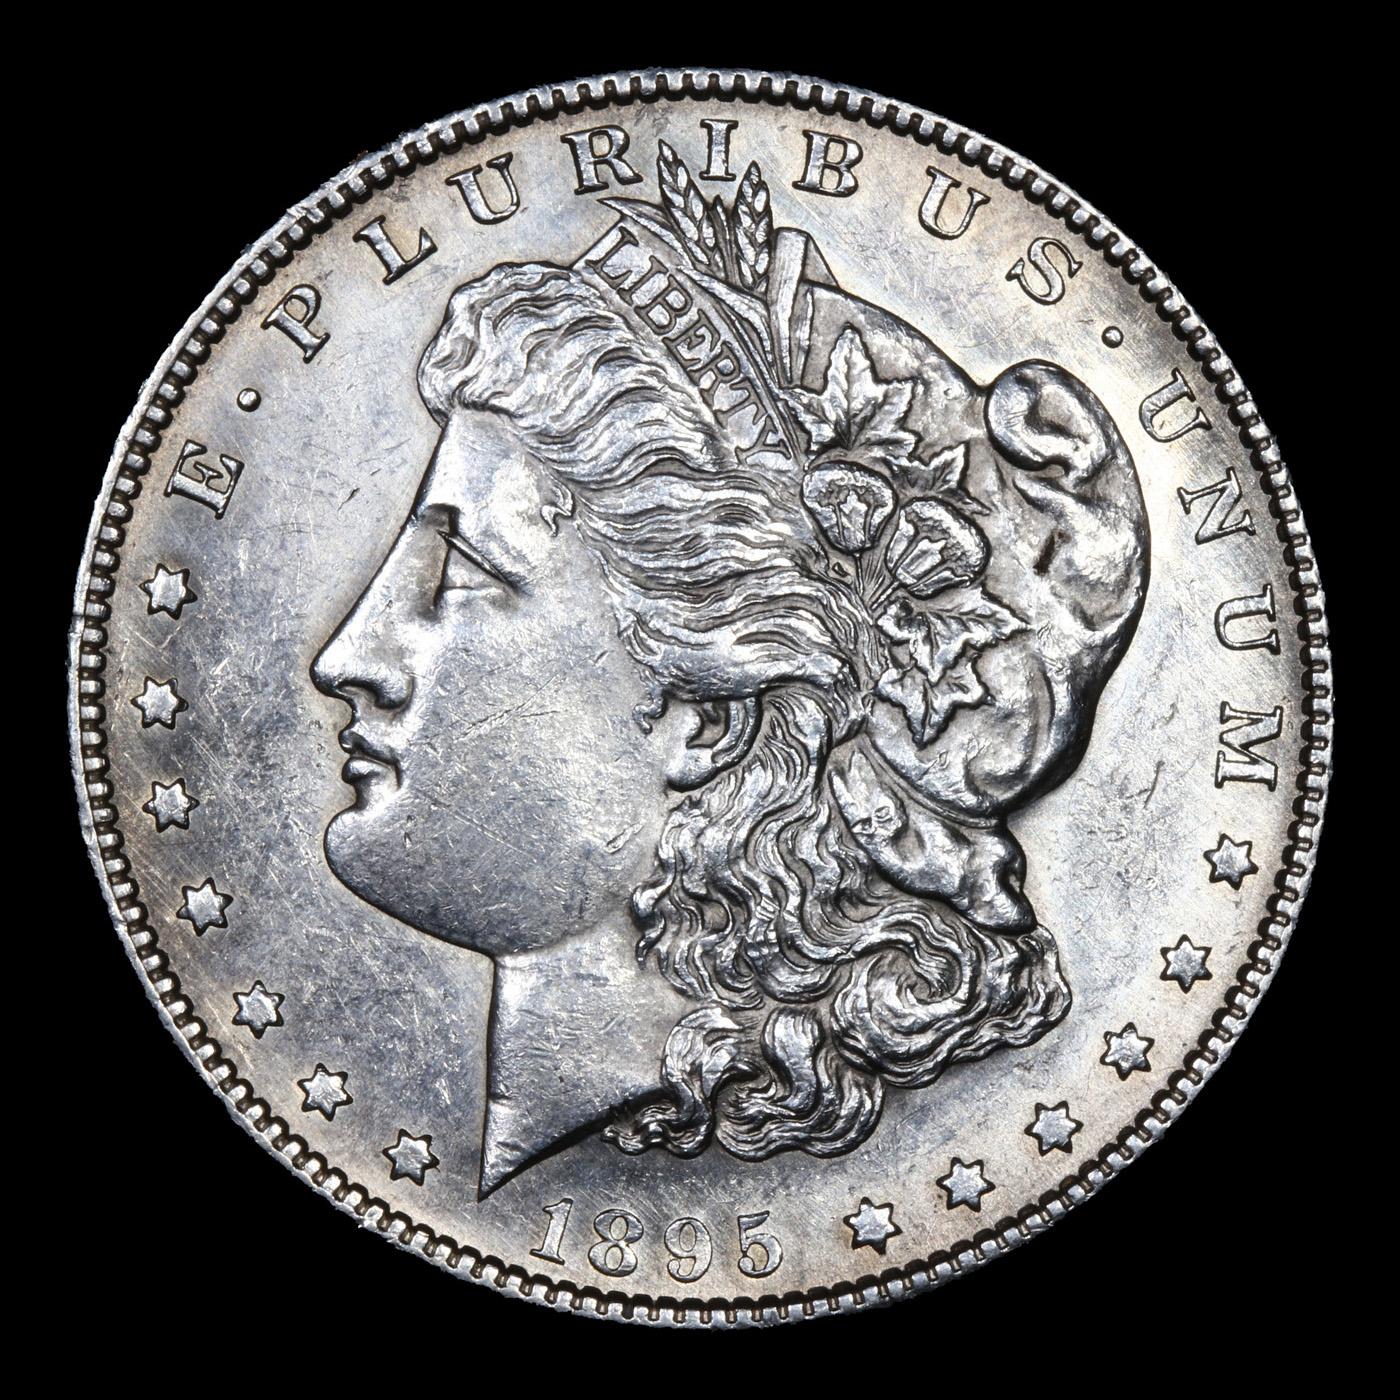 ***Auction Highlight*** 1895-s Morgan Dollar $1 Graded Select Unc By USCG (fc)